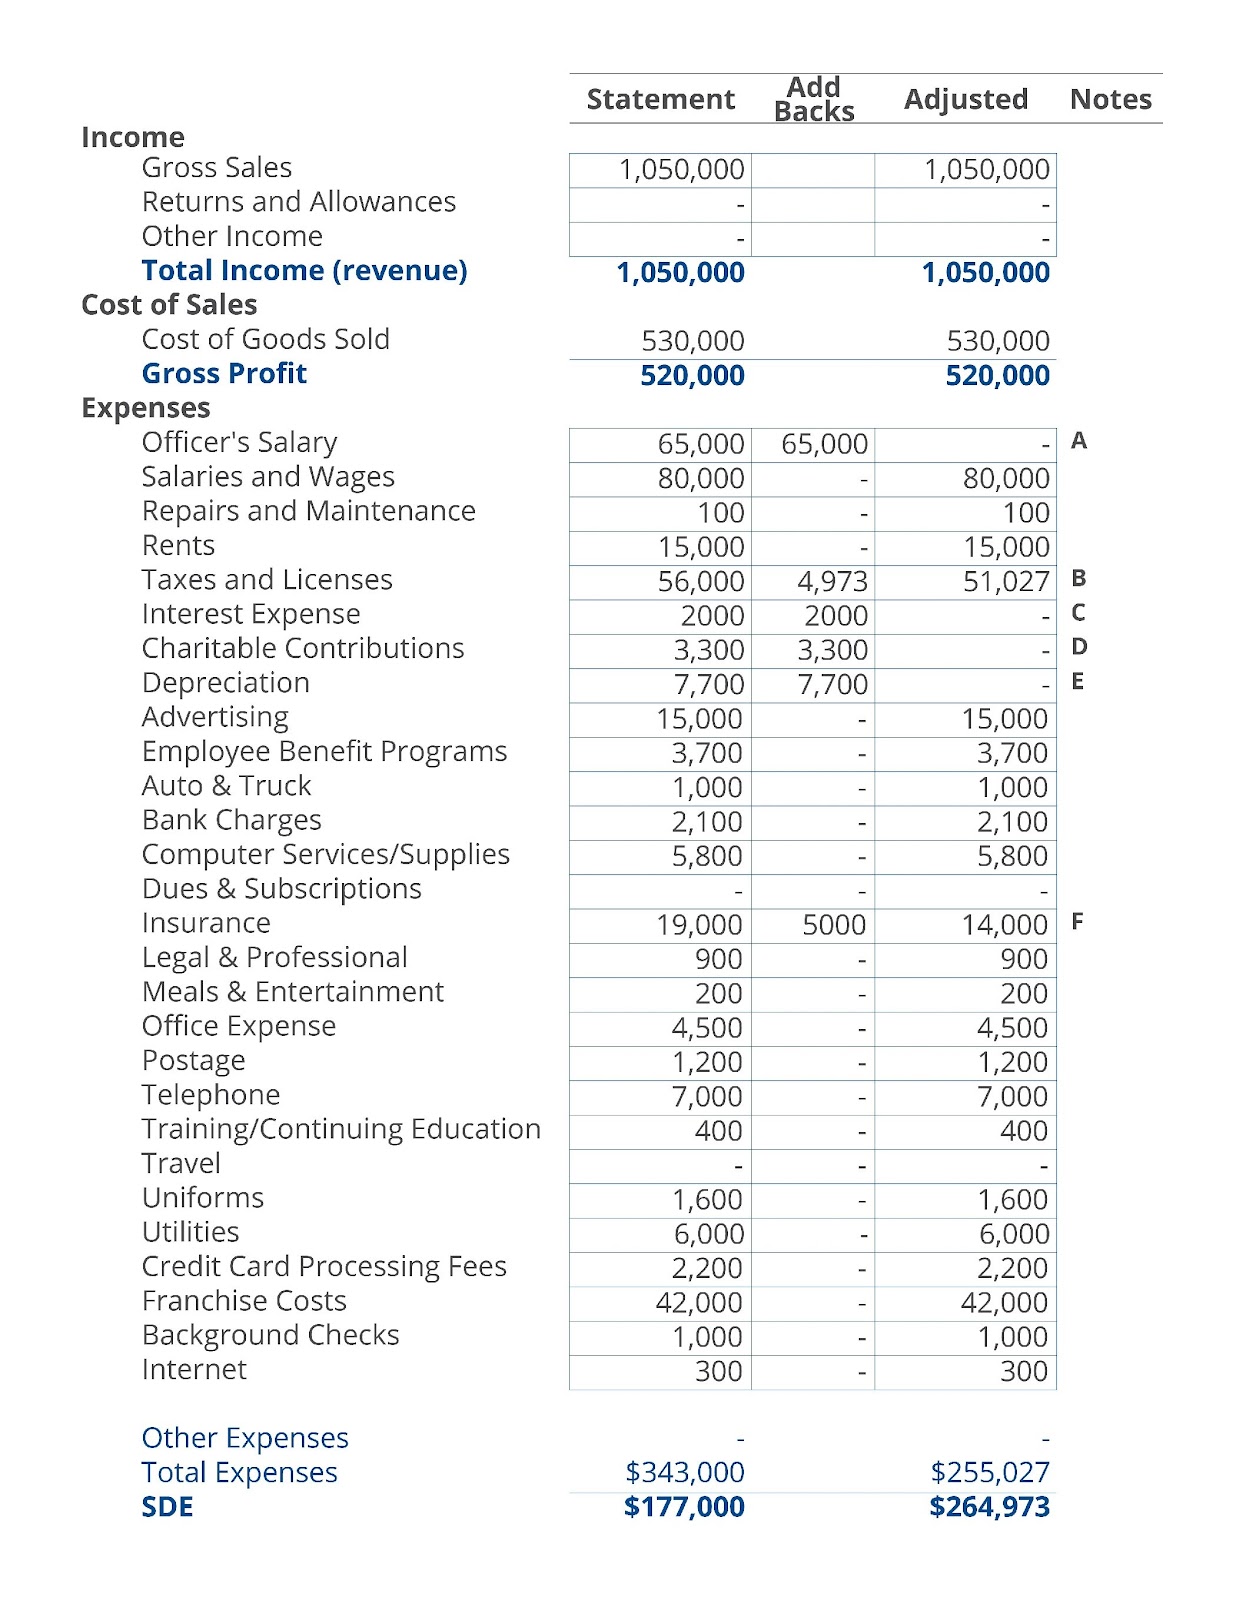 Sample income statement used to find SDE of business